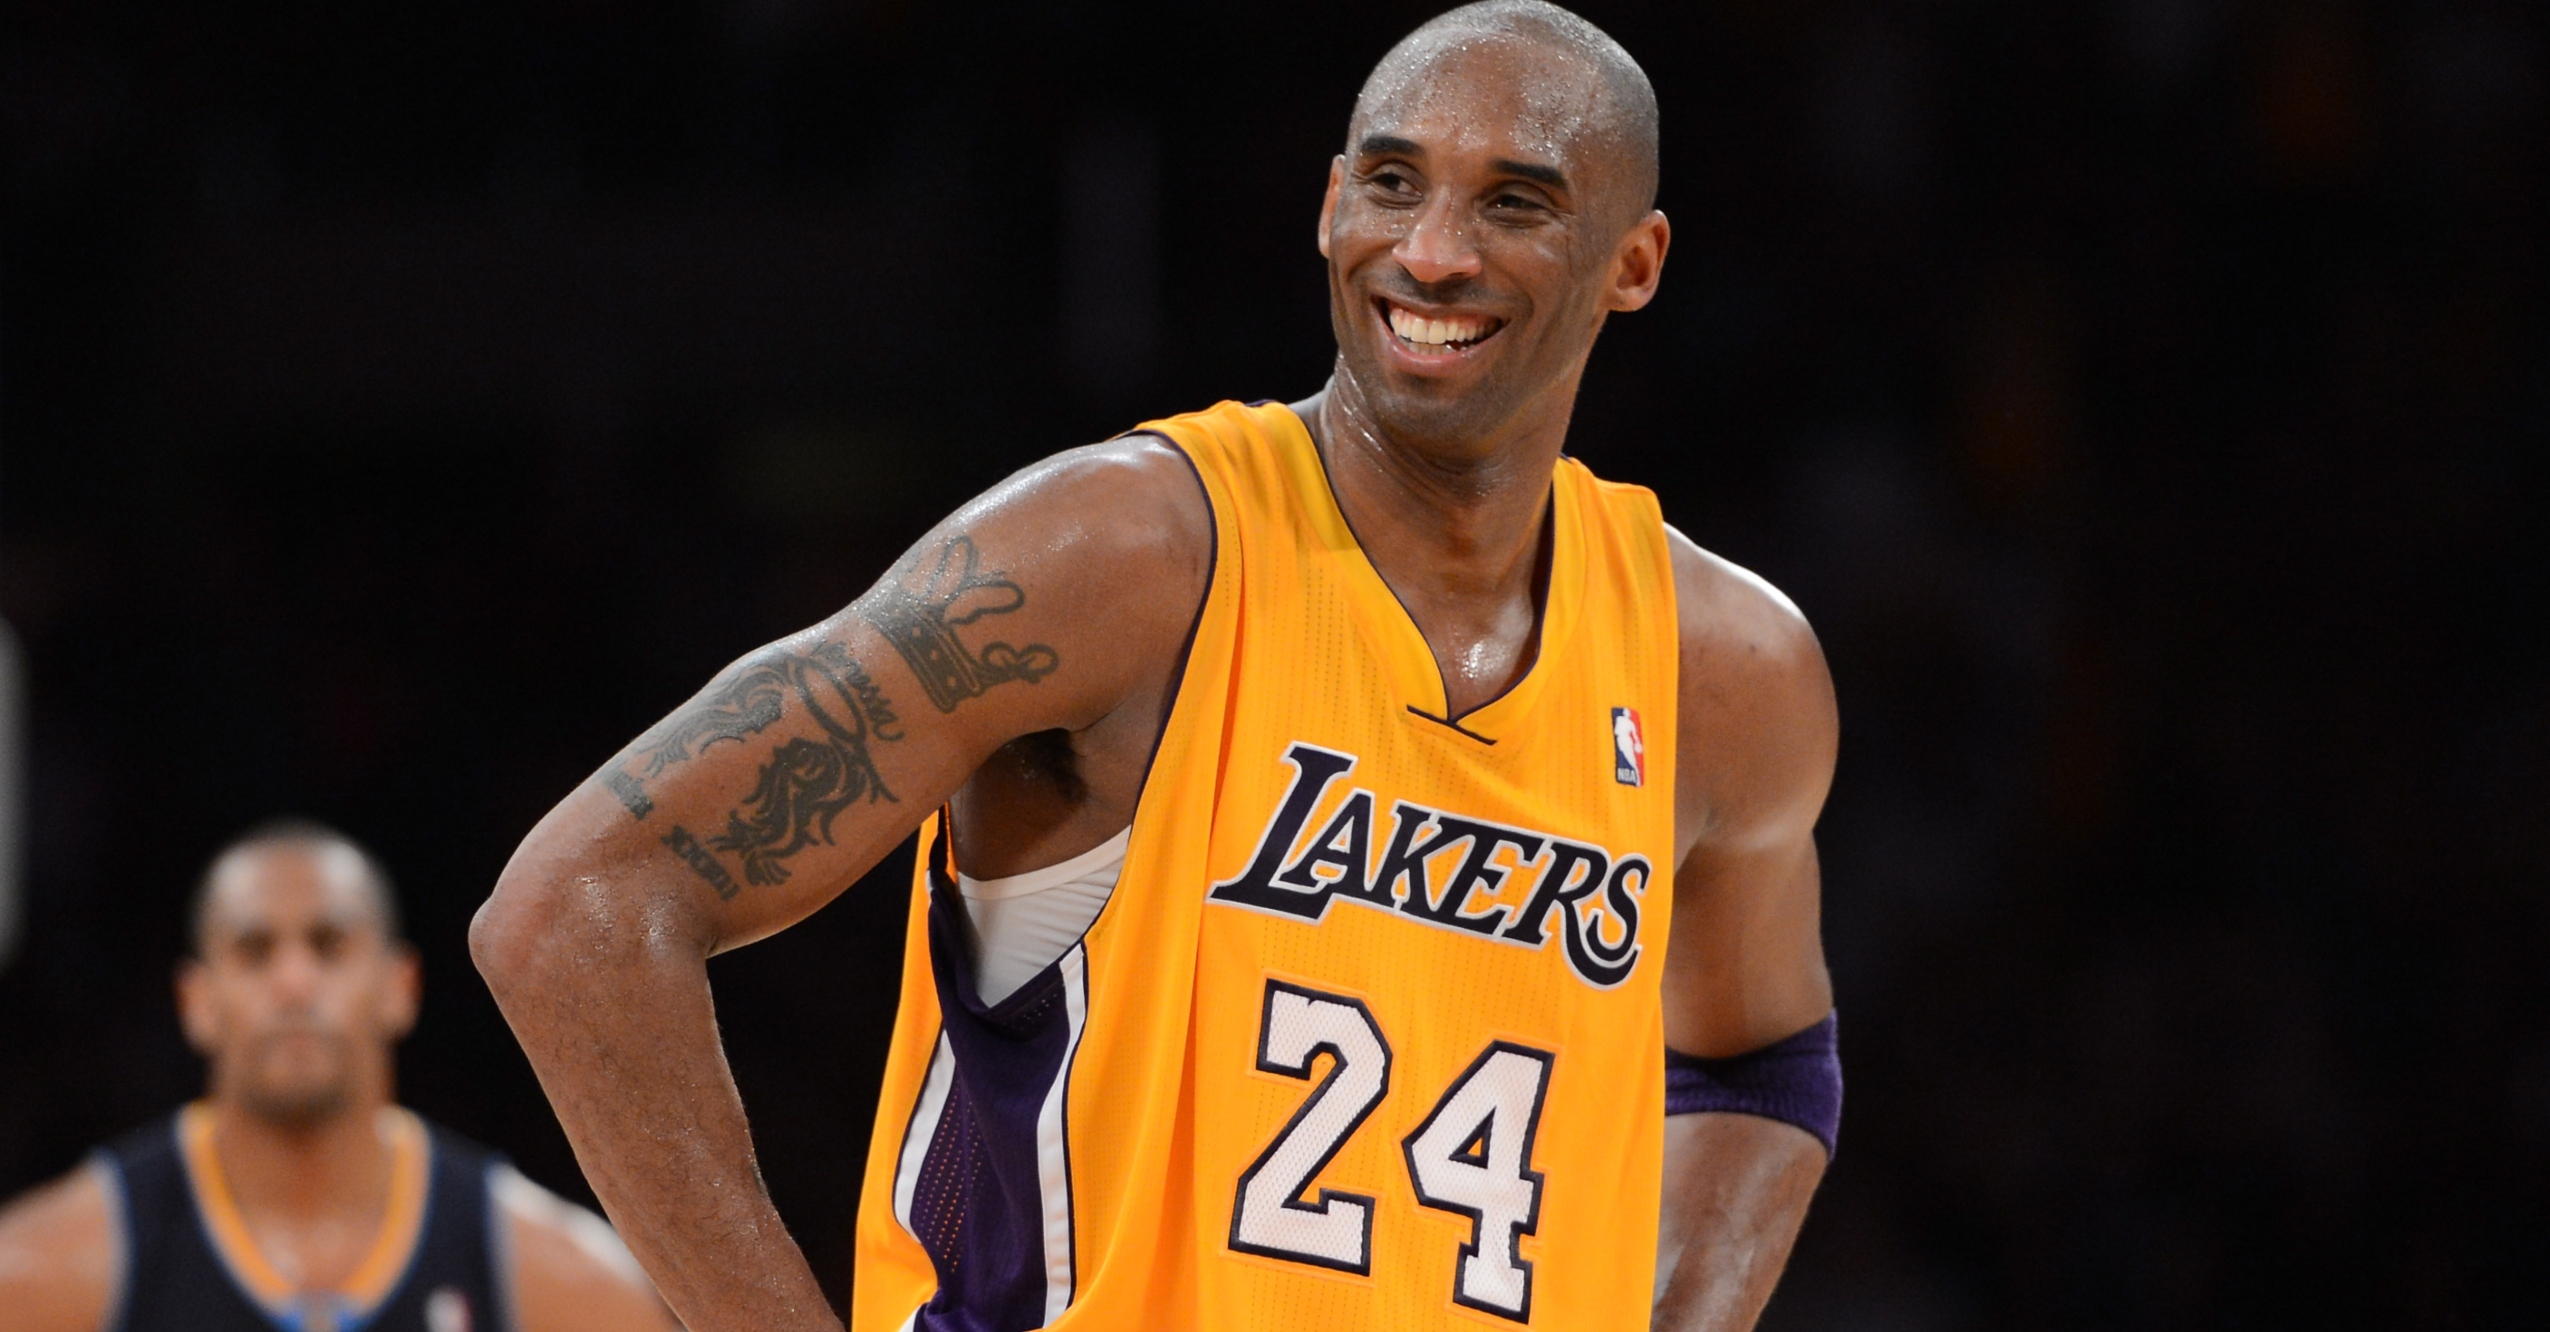 Kobe Bryant's MVP jersey could fetch up to $7 million at auction